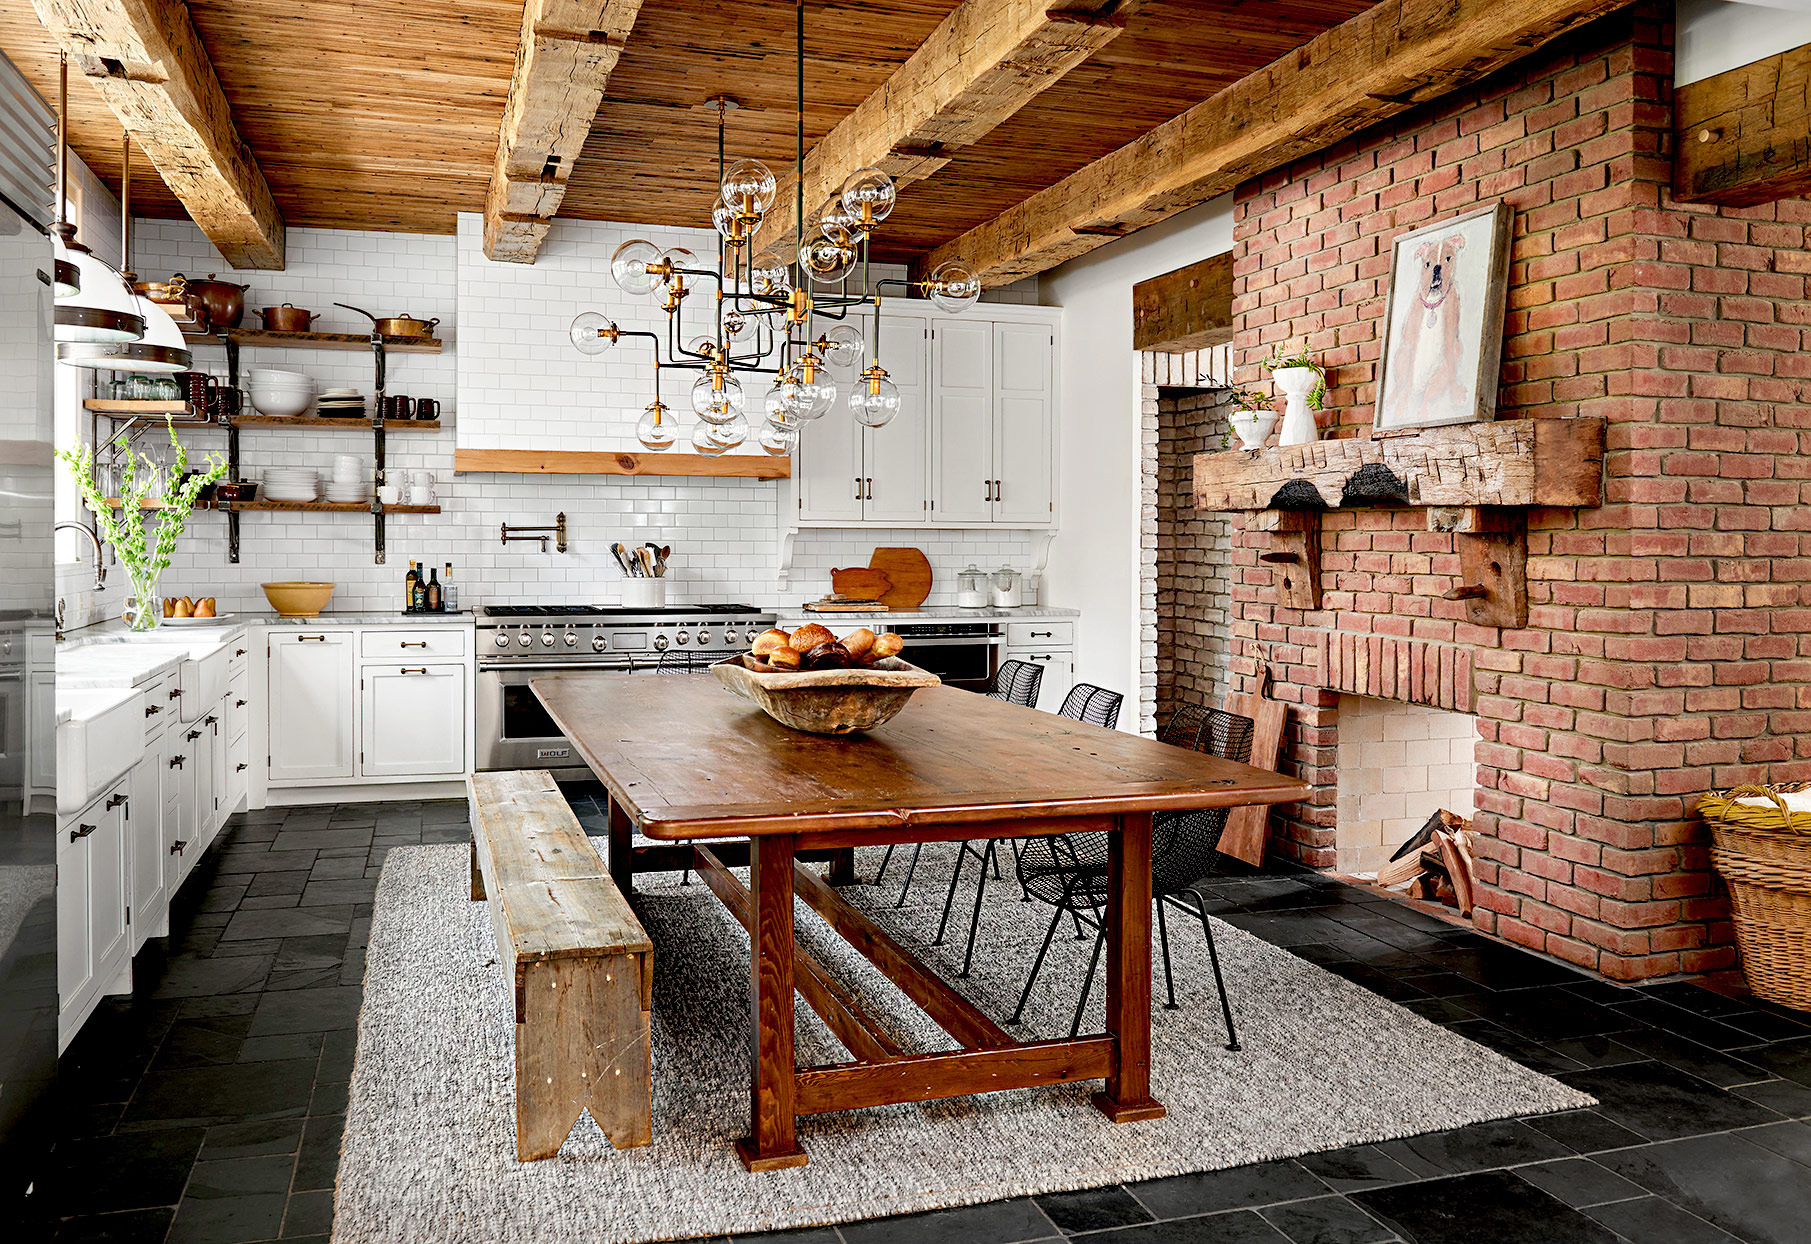 18 Design Tips and Ideas to Create the Rustic Farmhouse Kitchen of ...